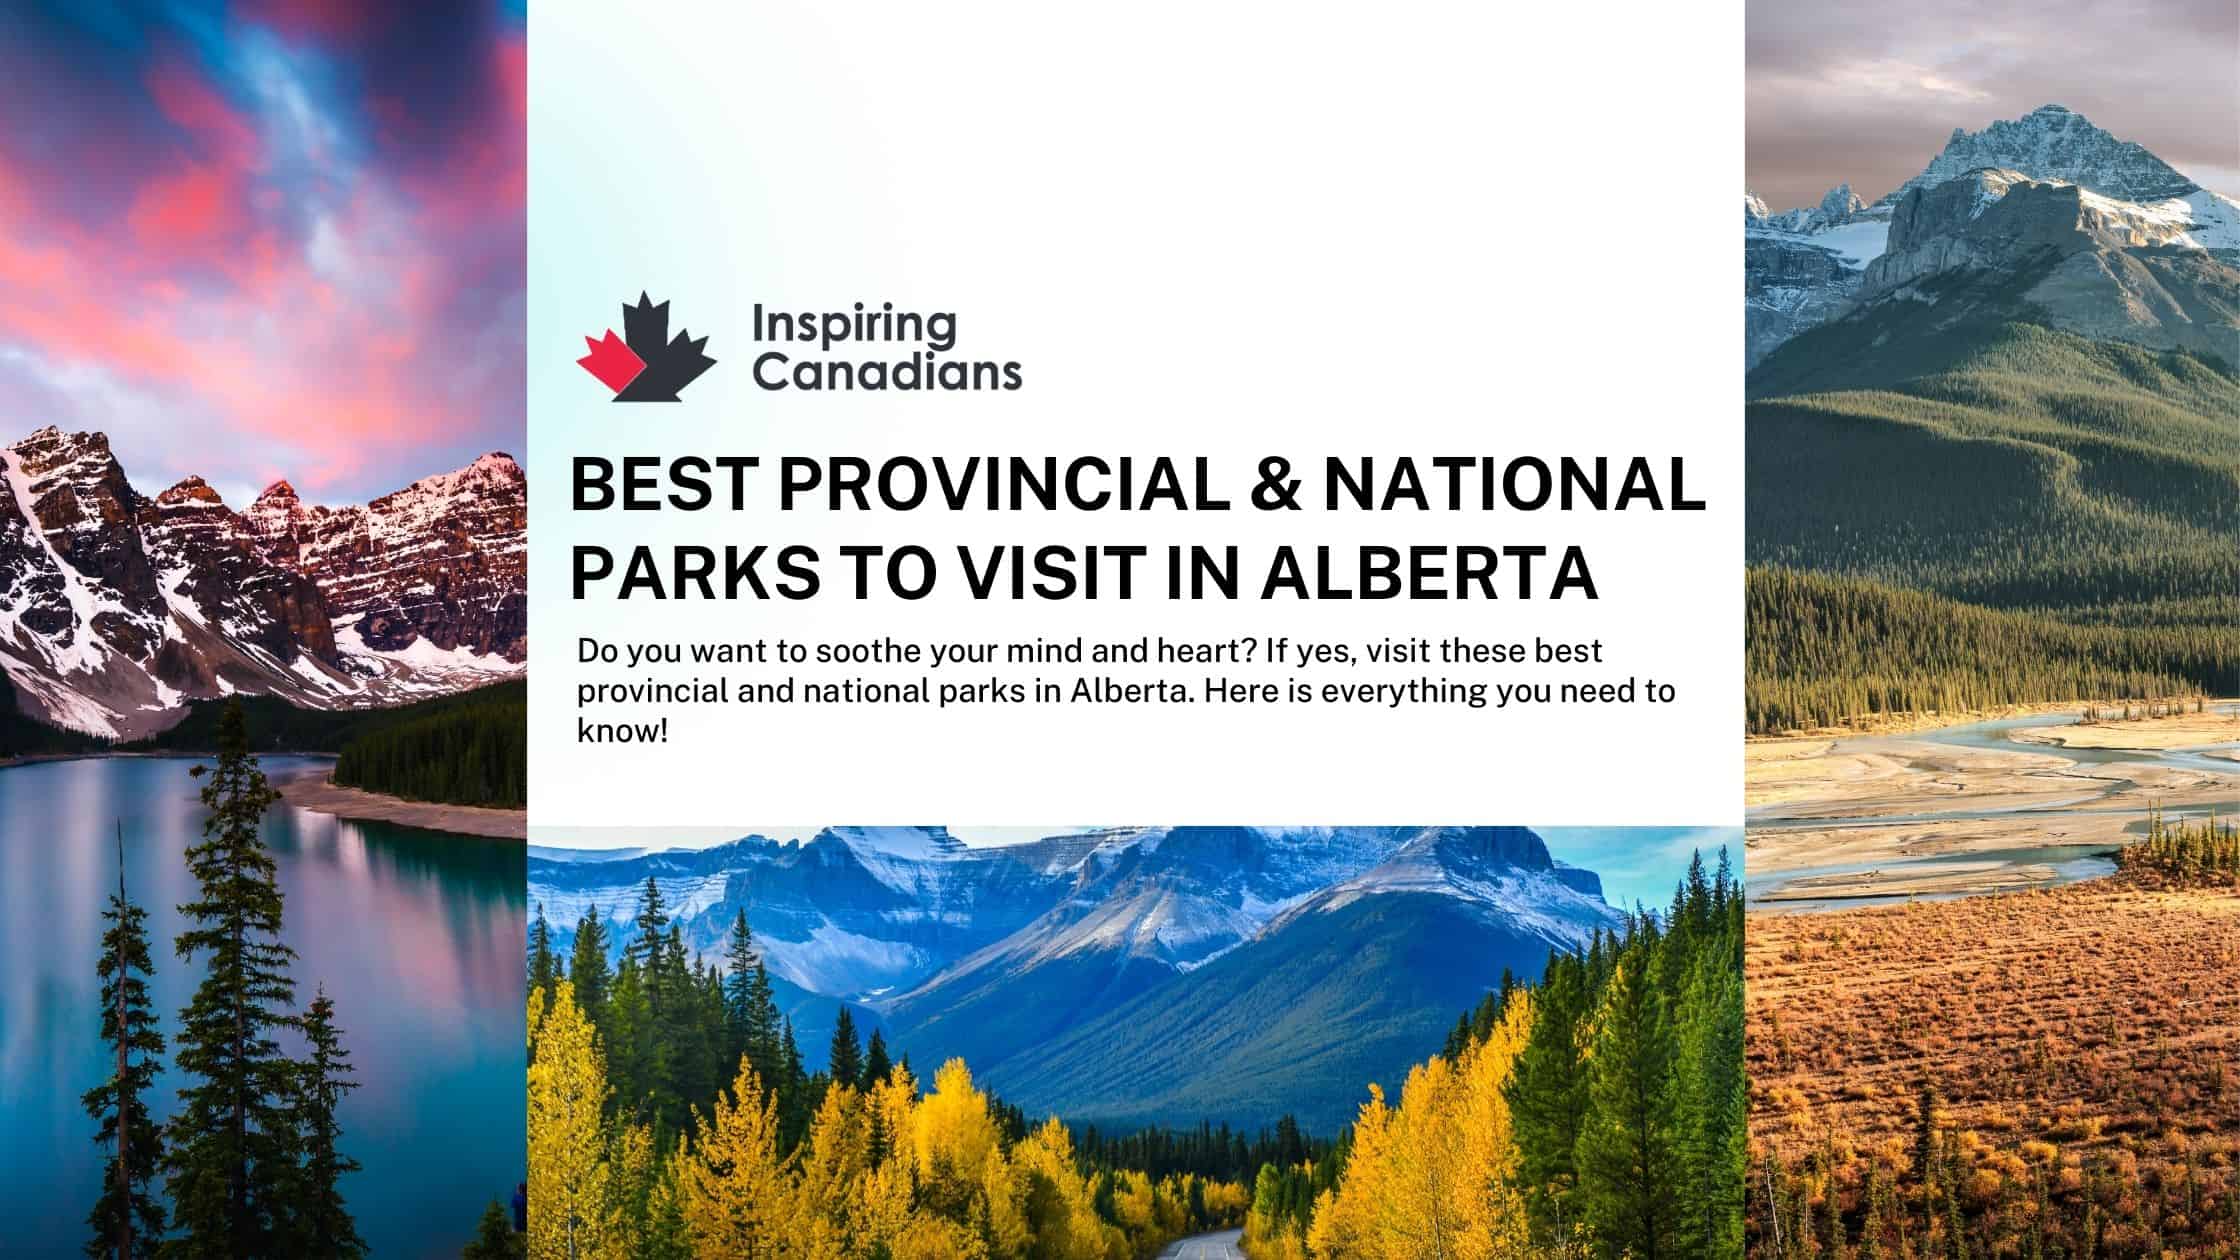 Best Provincial & National Parks to Visit in Alberta